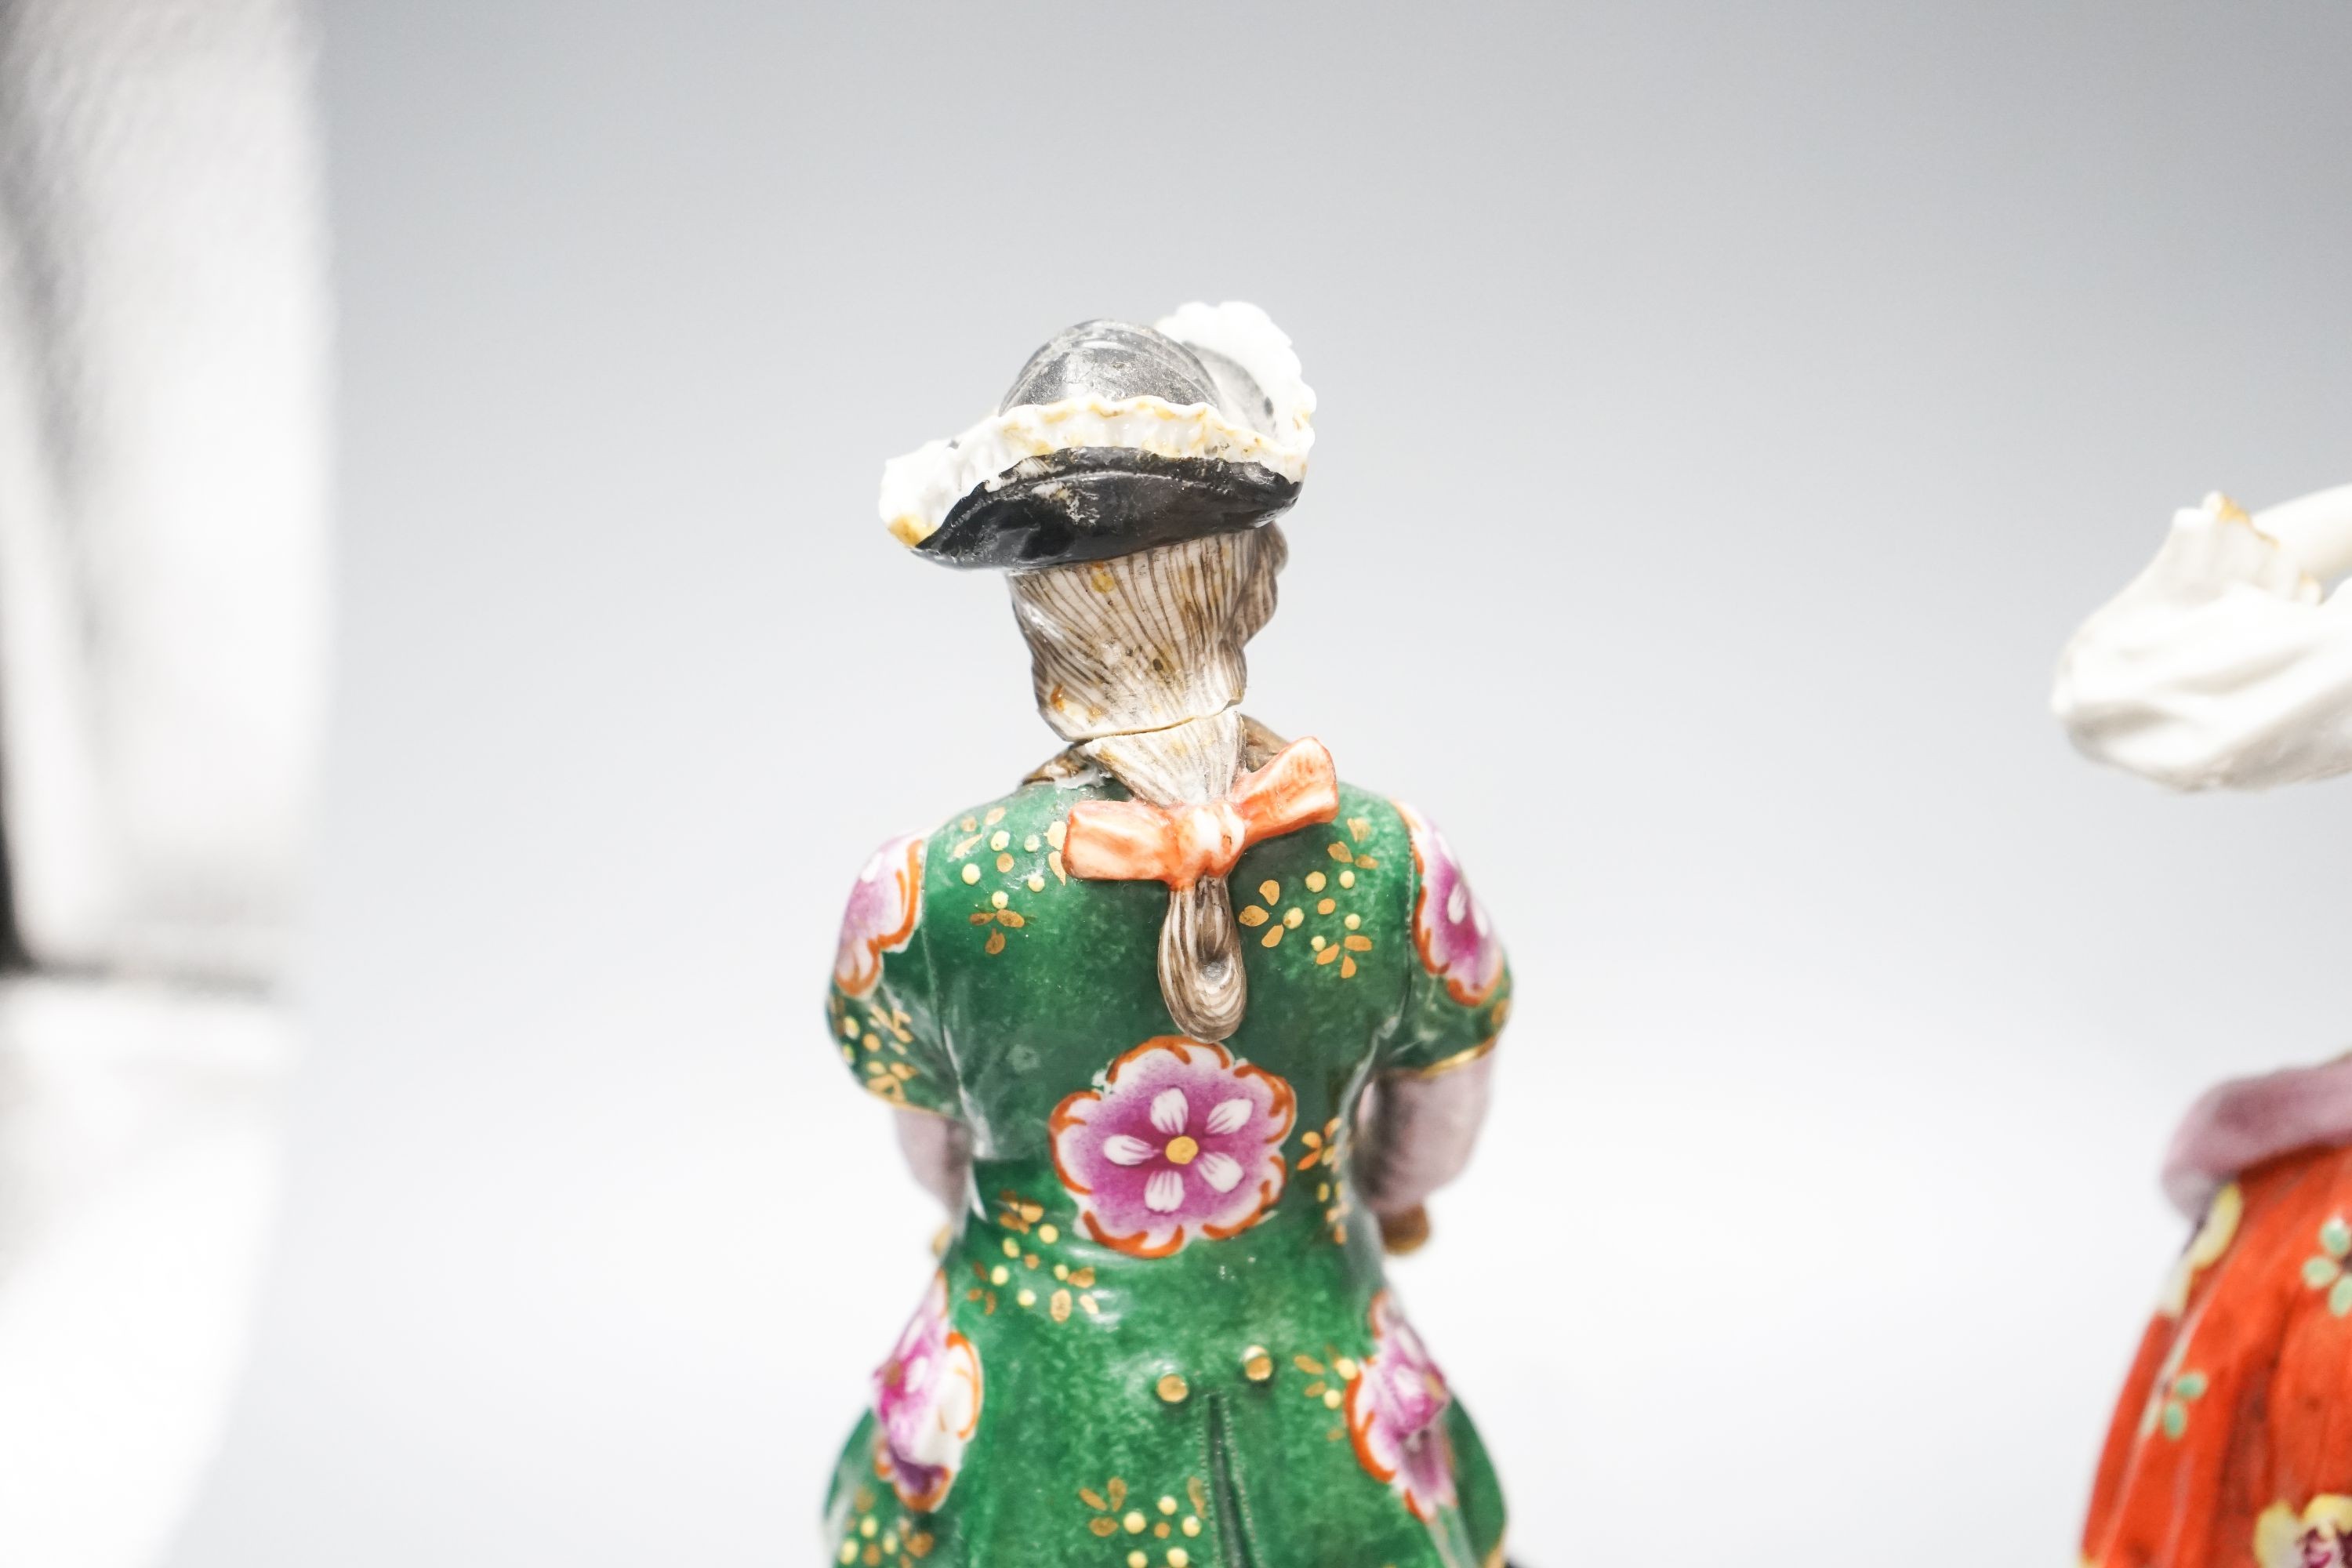 A Sitzendorf group of a Shepherd and shepherdess, three other Continental costume figures and a group (5) 27cm